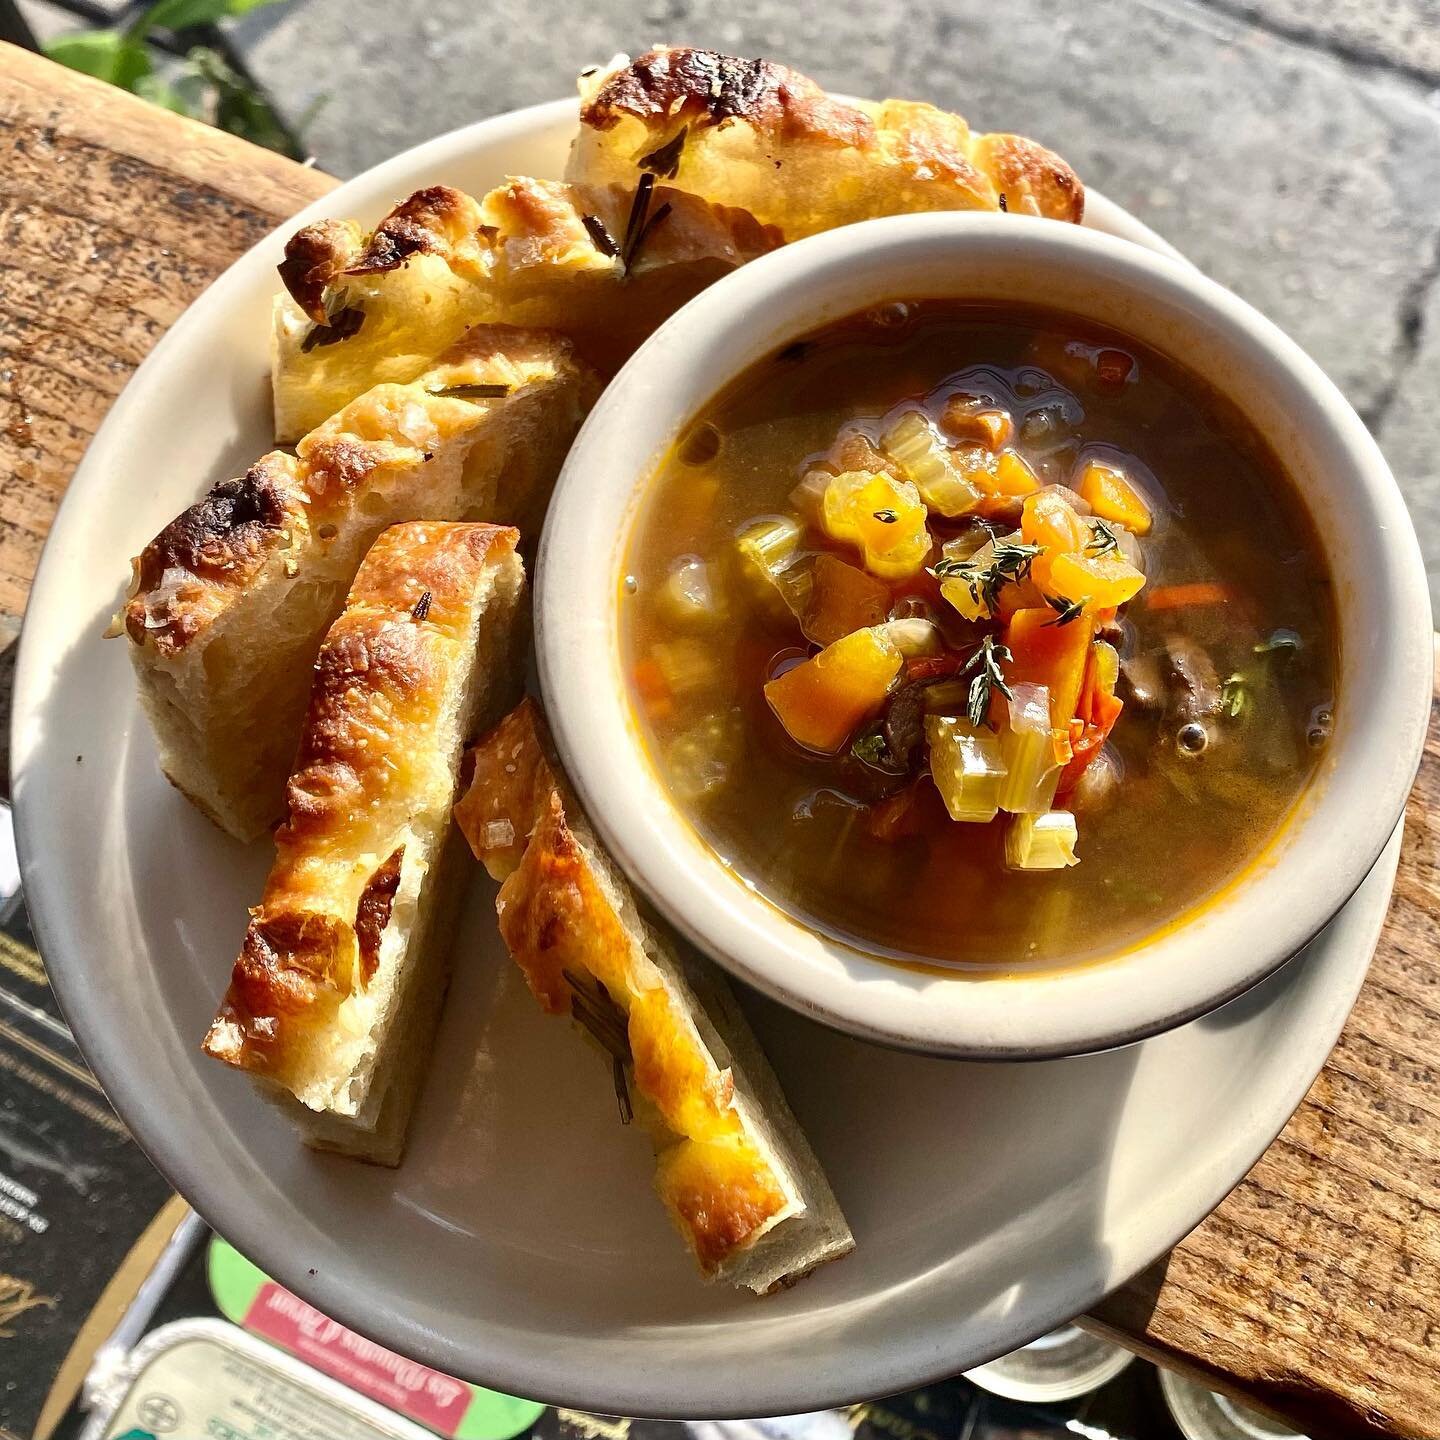 Come keep warm with our veggie soup! Paired perfectly with @candbnyc focaccia. As always, we&rsquo;ve also got hot cocktails and heaters for our outdoor seating.
.
.
.

#eastvillage #avenueb #tompkinssquarepark #nyceats #whatsonthetable #foodgram #fo